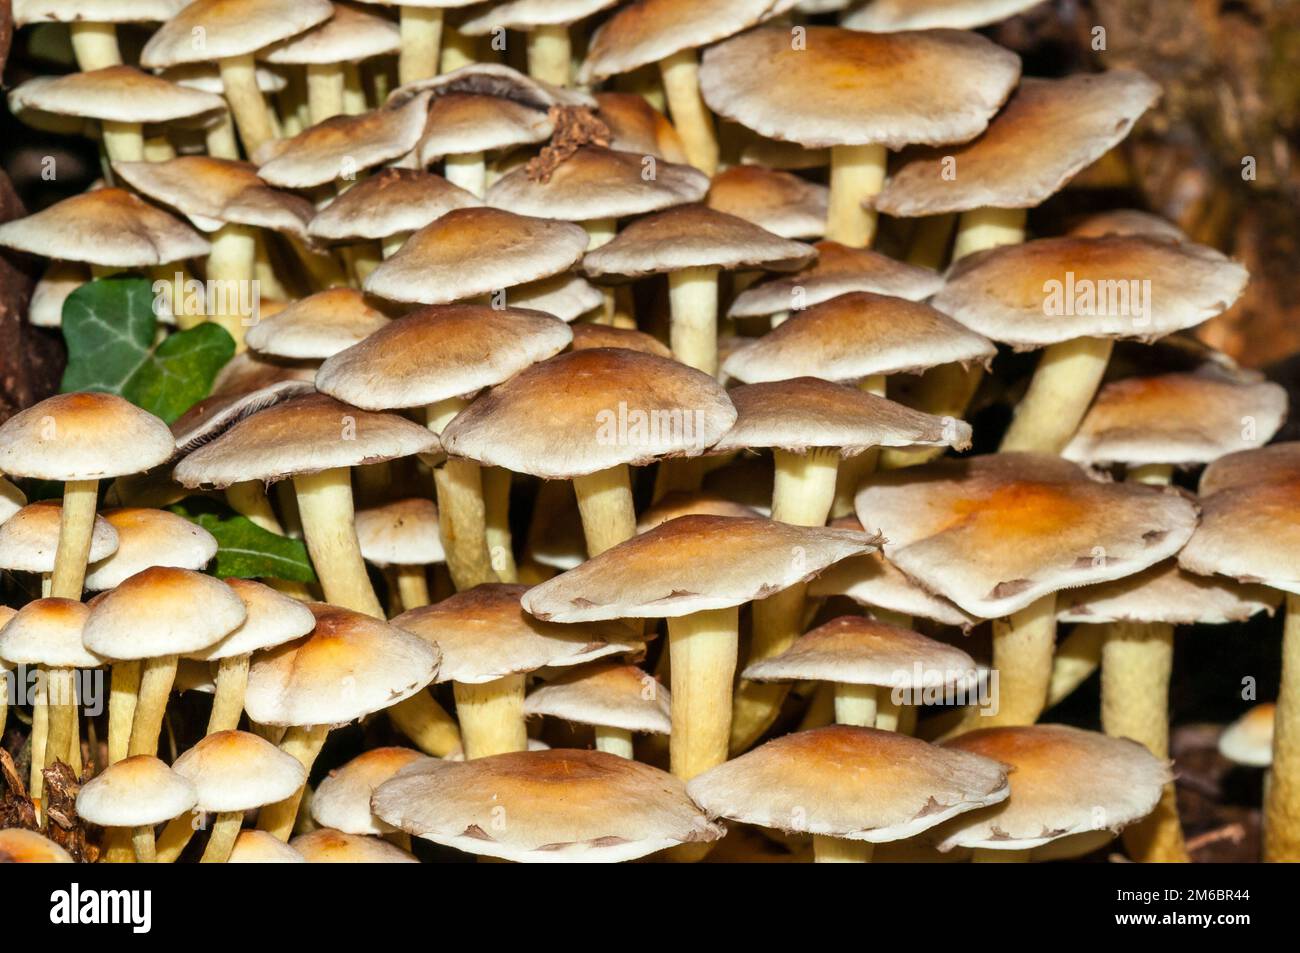 clustered woodlover, Hypholoma fasciculare, Catalonia, Spain Stock Photo